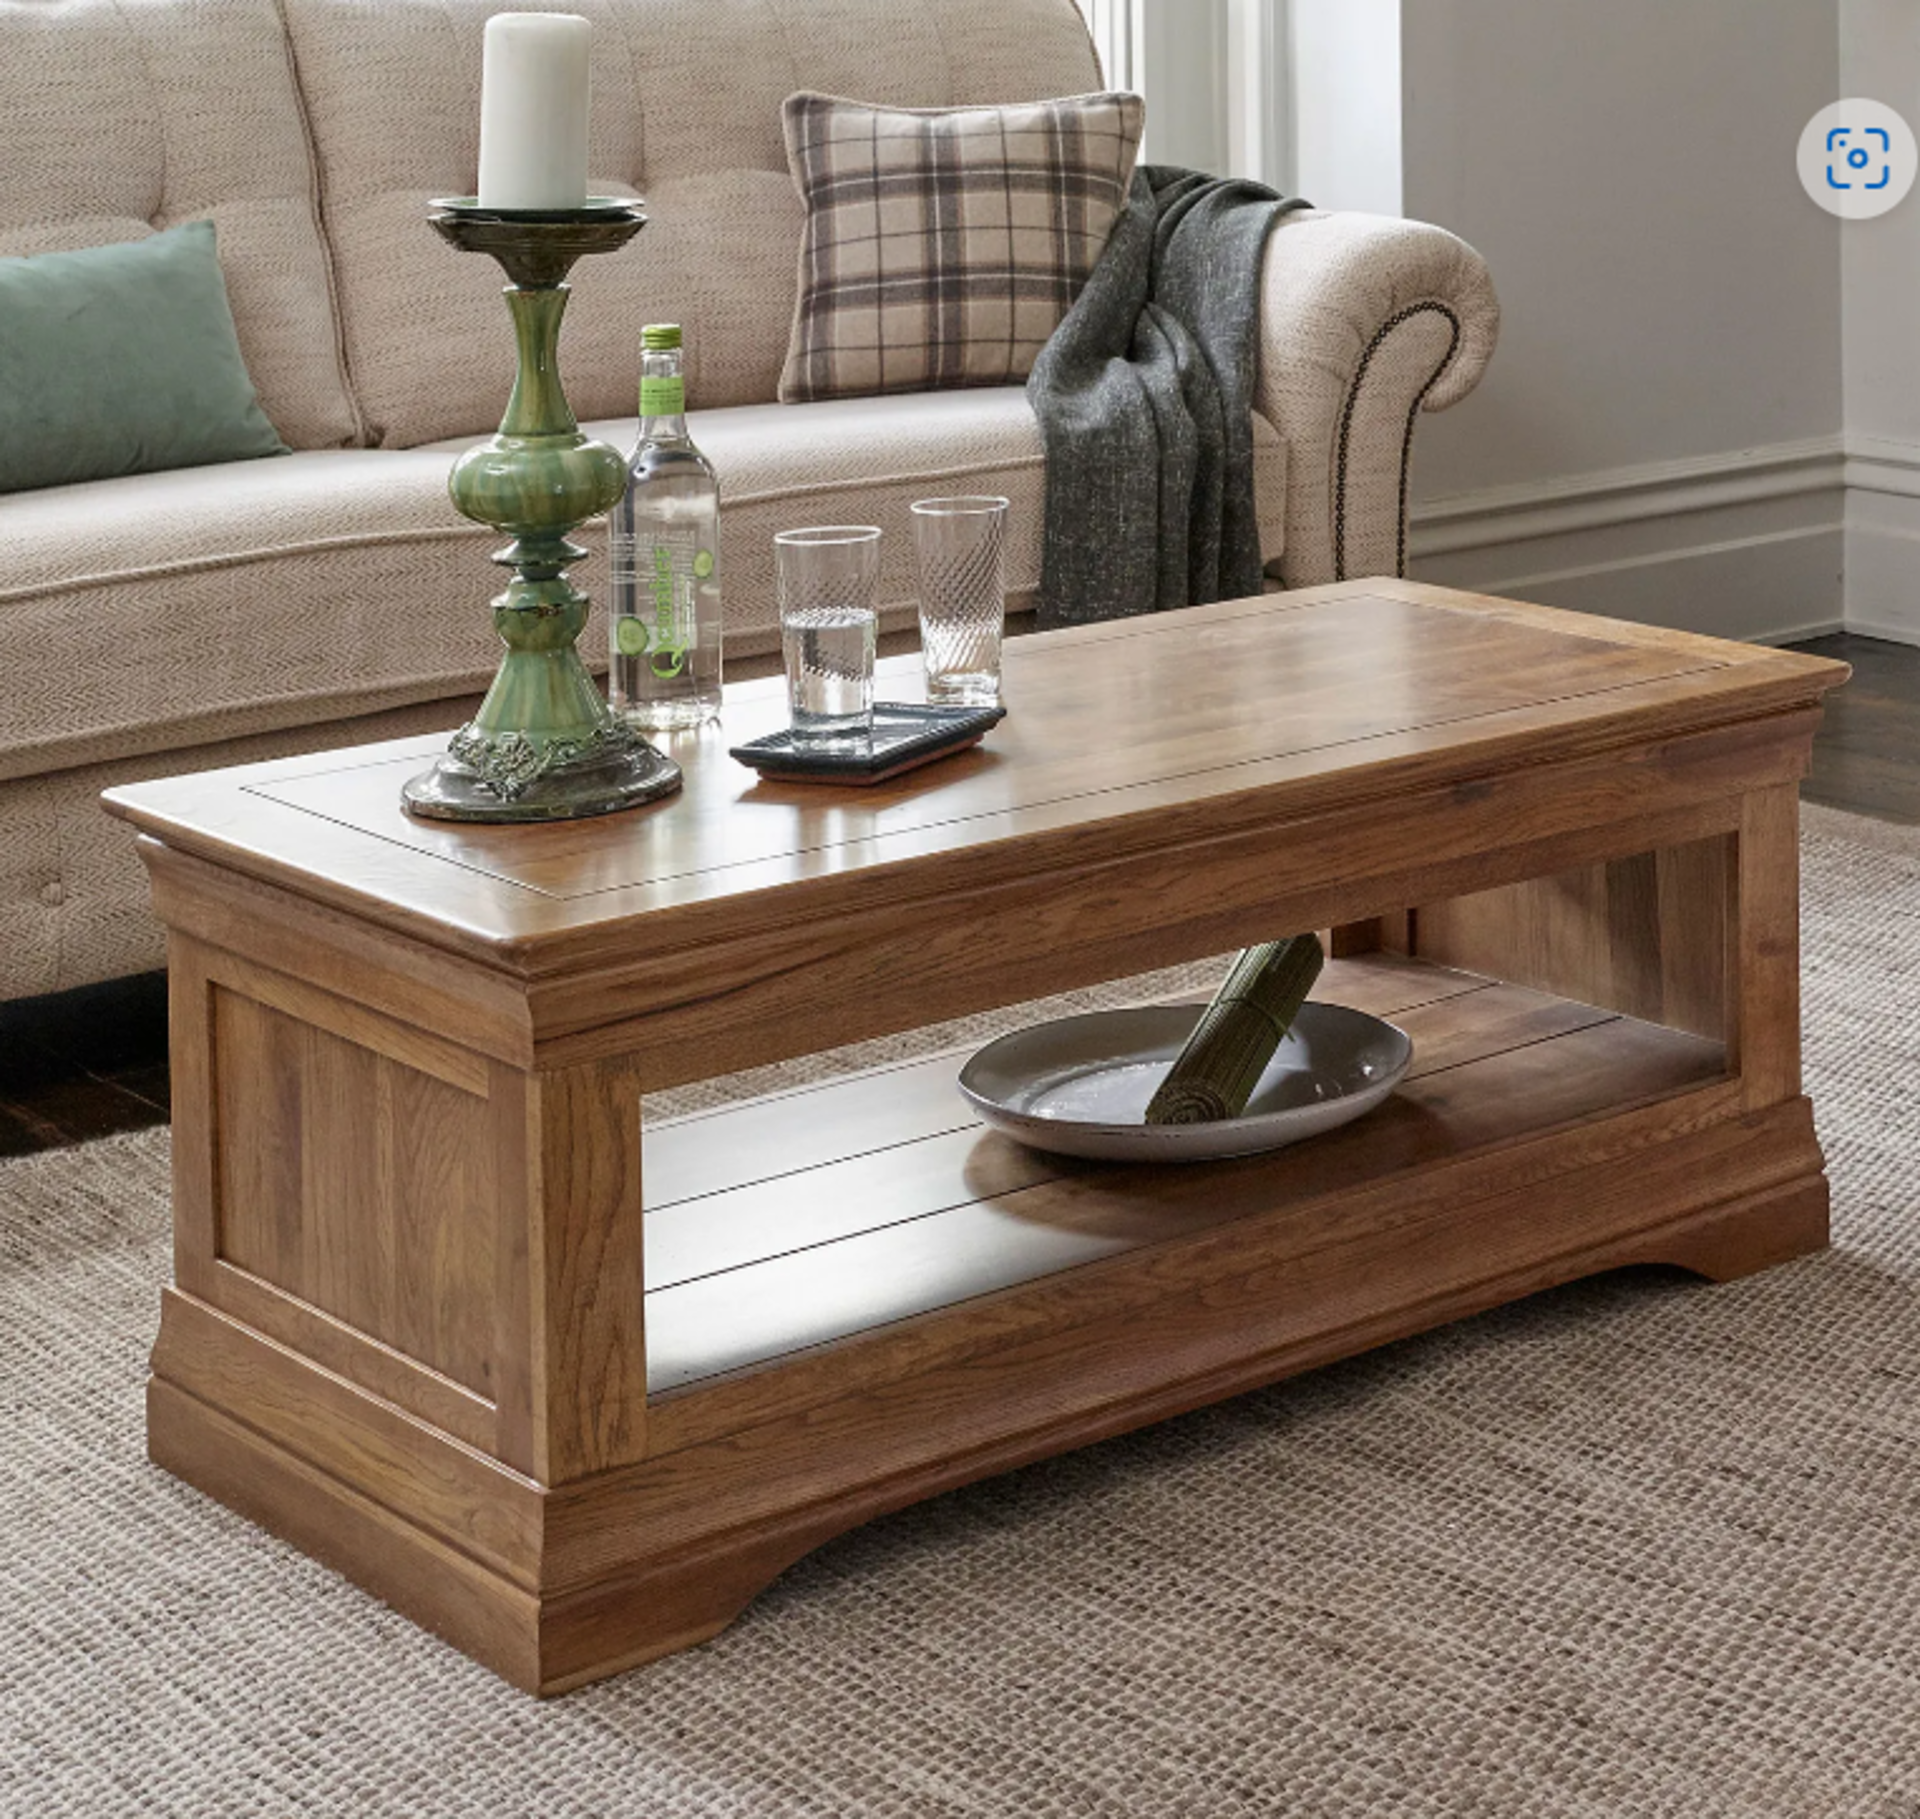 FRENCH FARMHOUSE Rustic Solid Oak Coffee Table. RRP £359.99. The French Farmhouse Rustic Solid Oak - Image 2 of 2